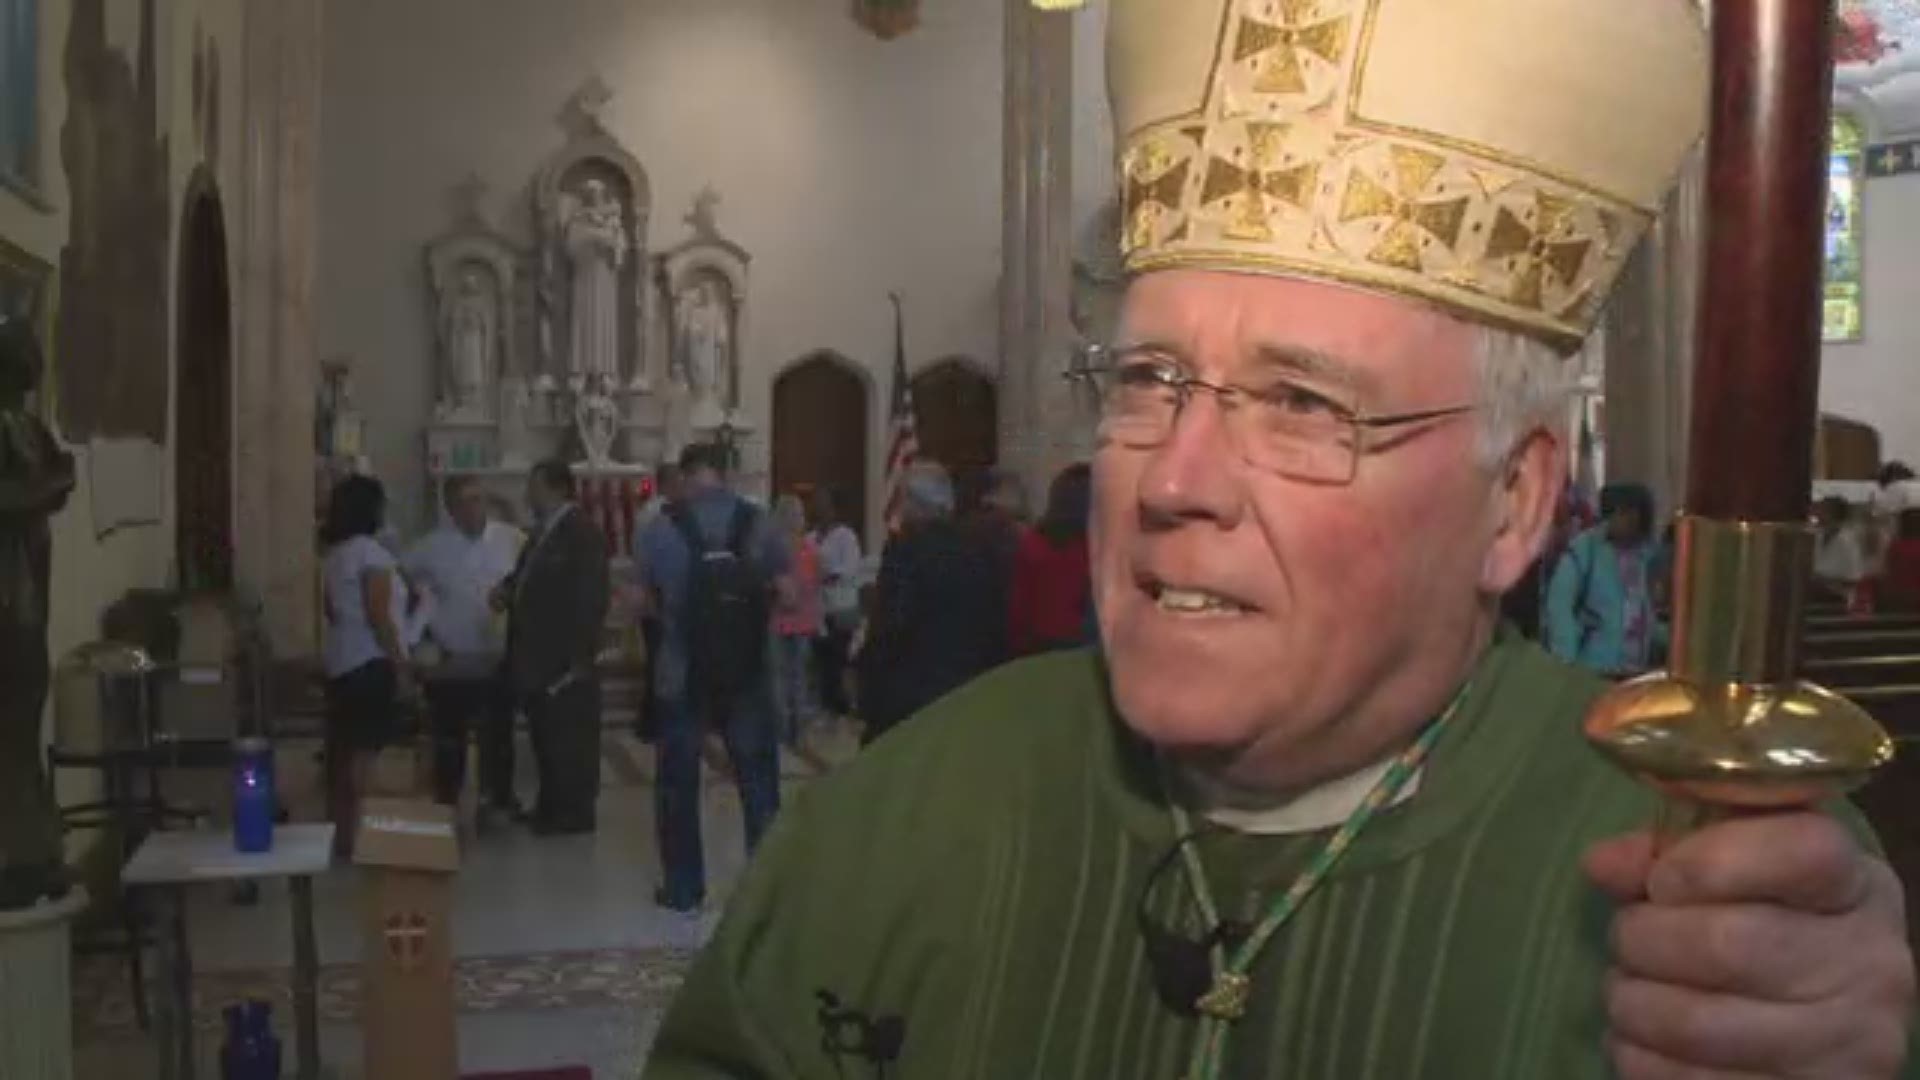 Buffalo Bishop Richard Malone spoke with 2 On Your Side after mass at the Holy Angels Catholic Church on Porter Avenue in Buffalo.